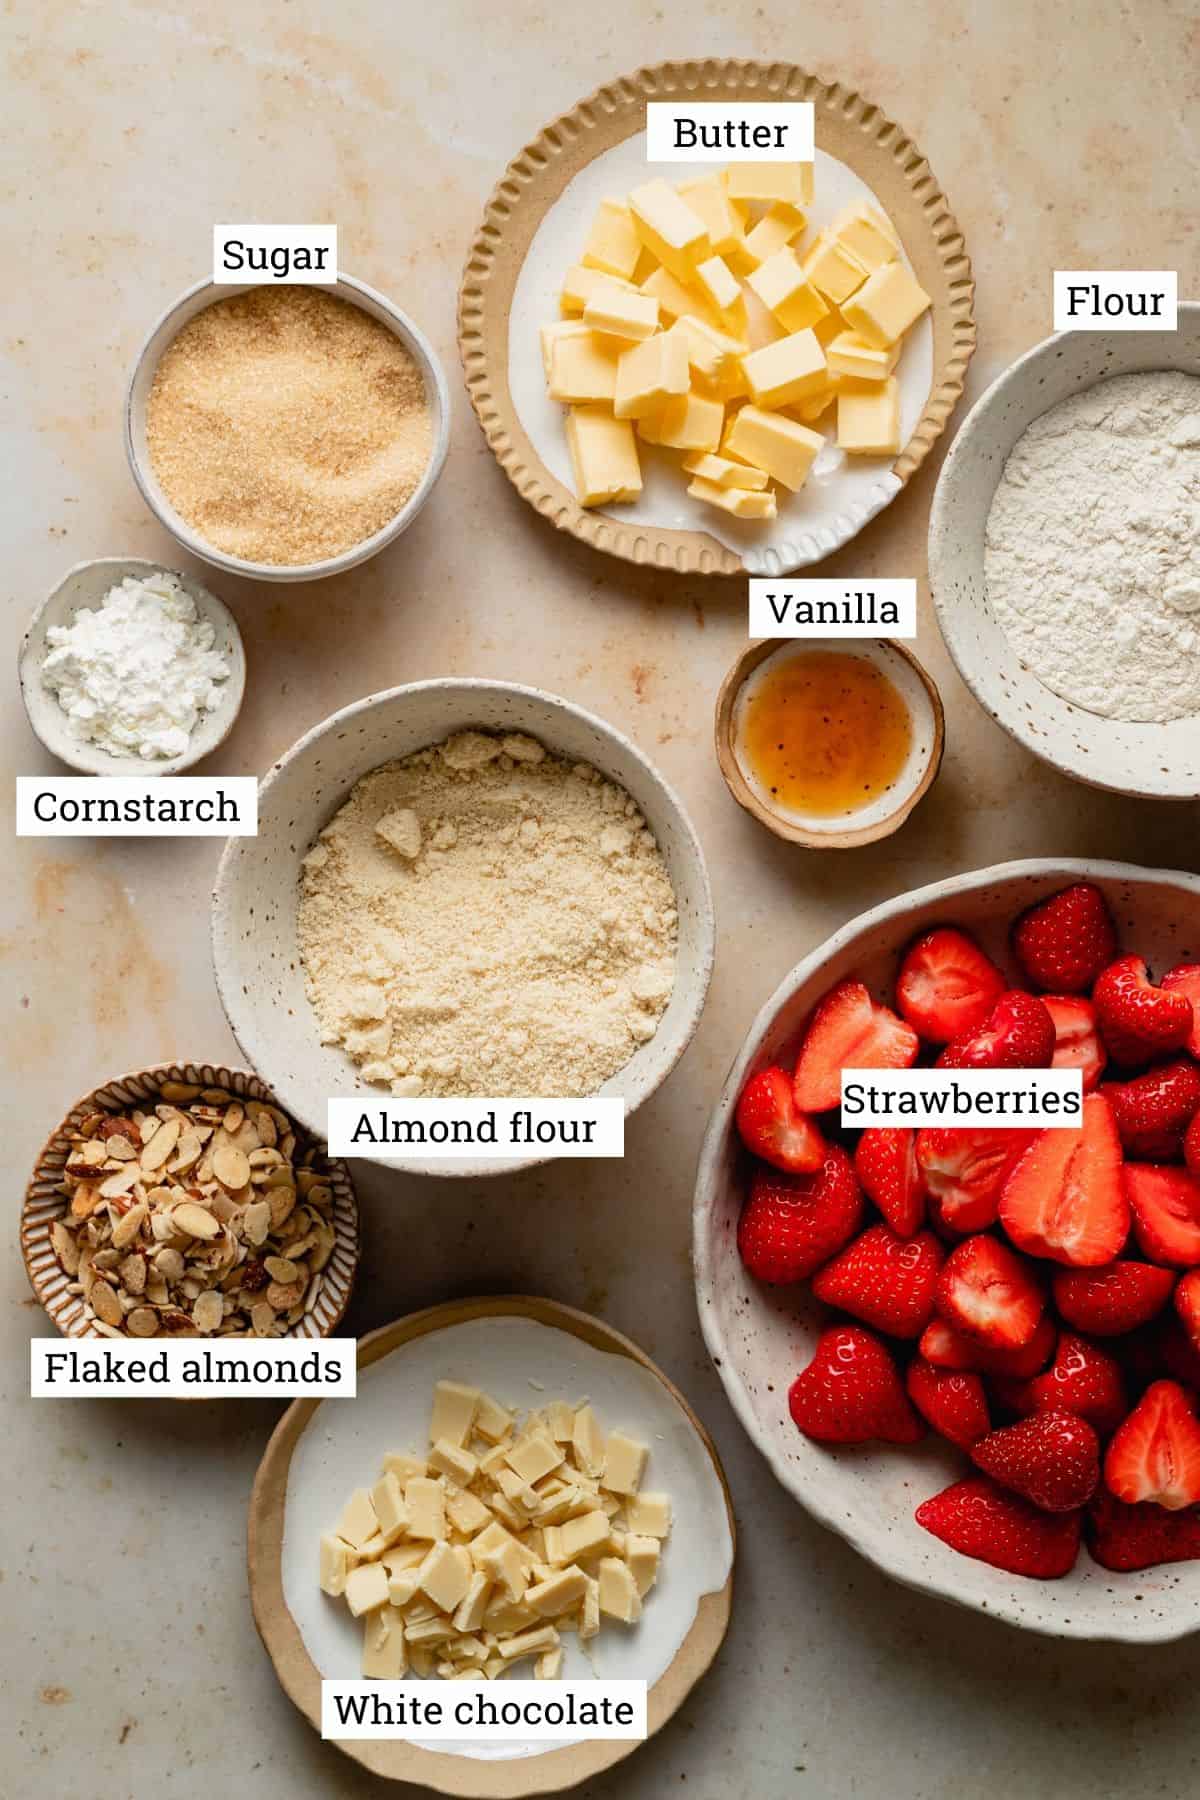 Ingredients for the crumble in various bowls including strawberries, sugar, butter and flour.